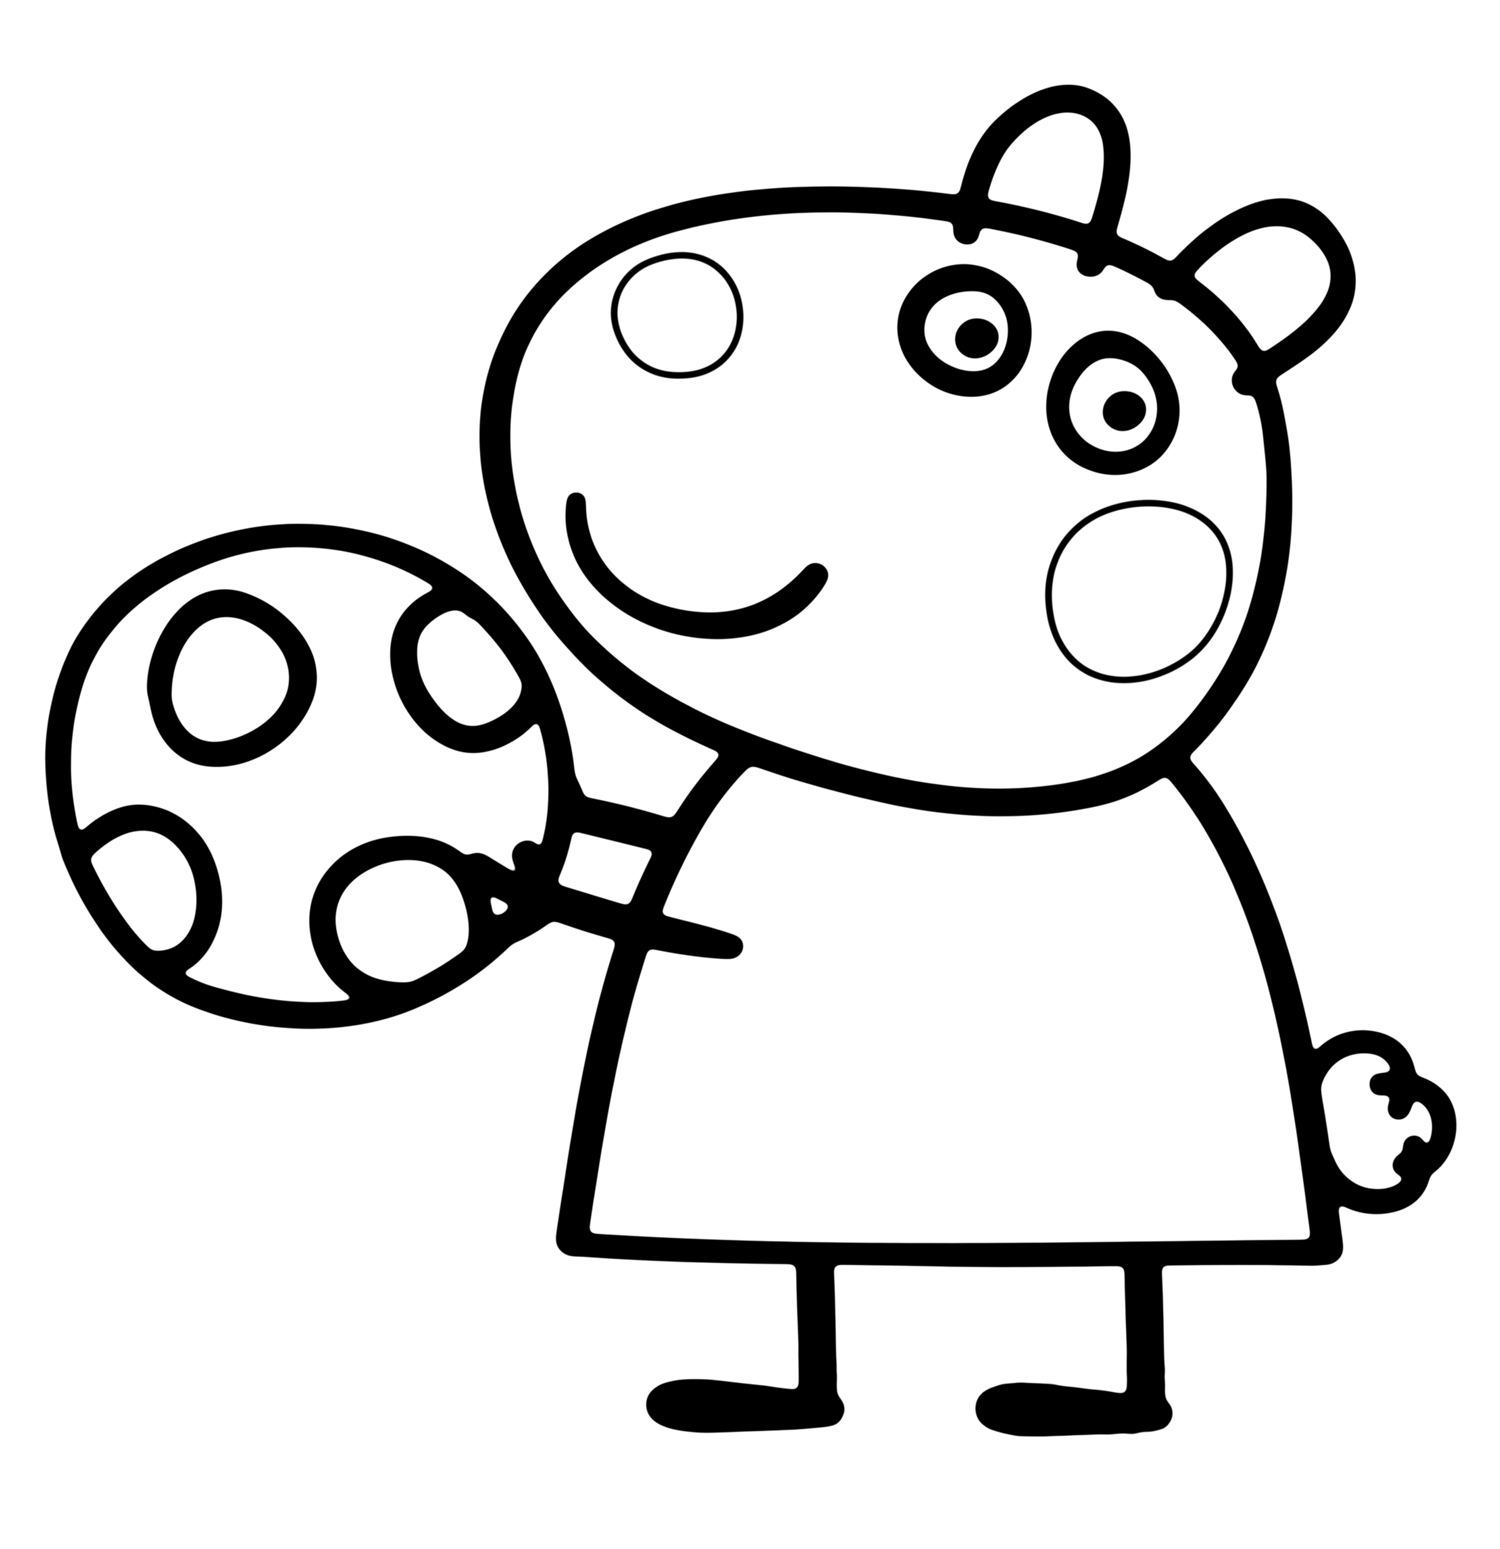 Suzy Sheep Peppa Pig Coloring Pages Sketch Coloring Page